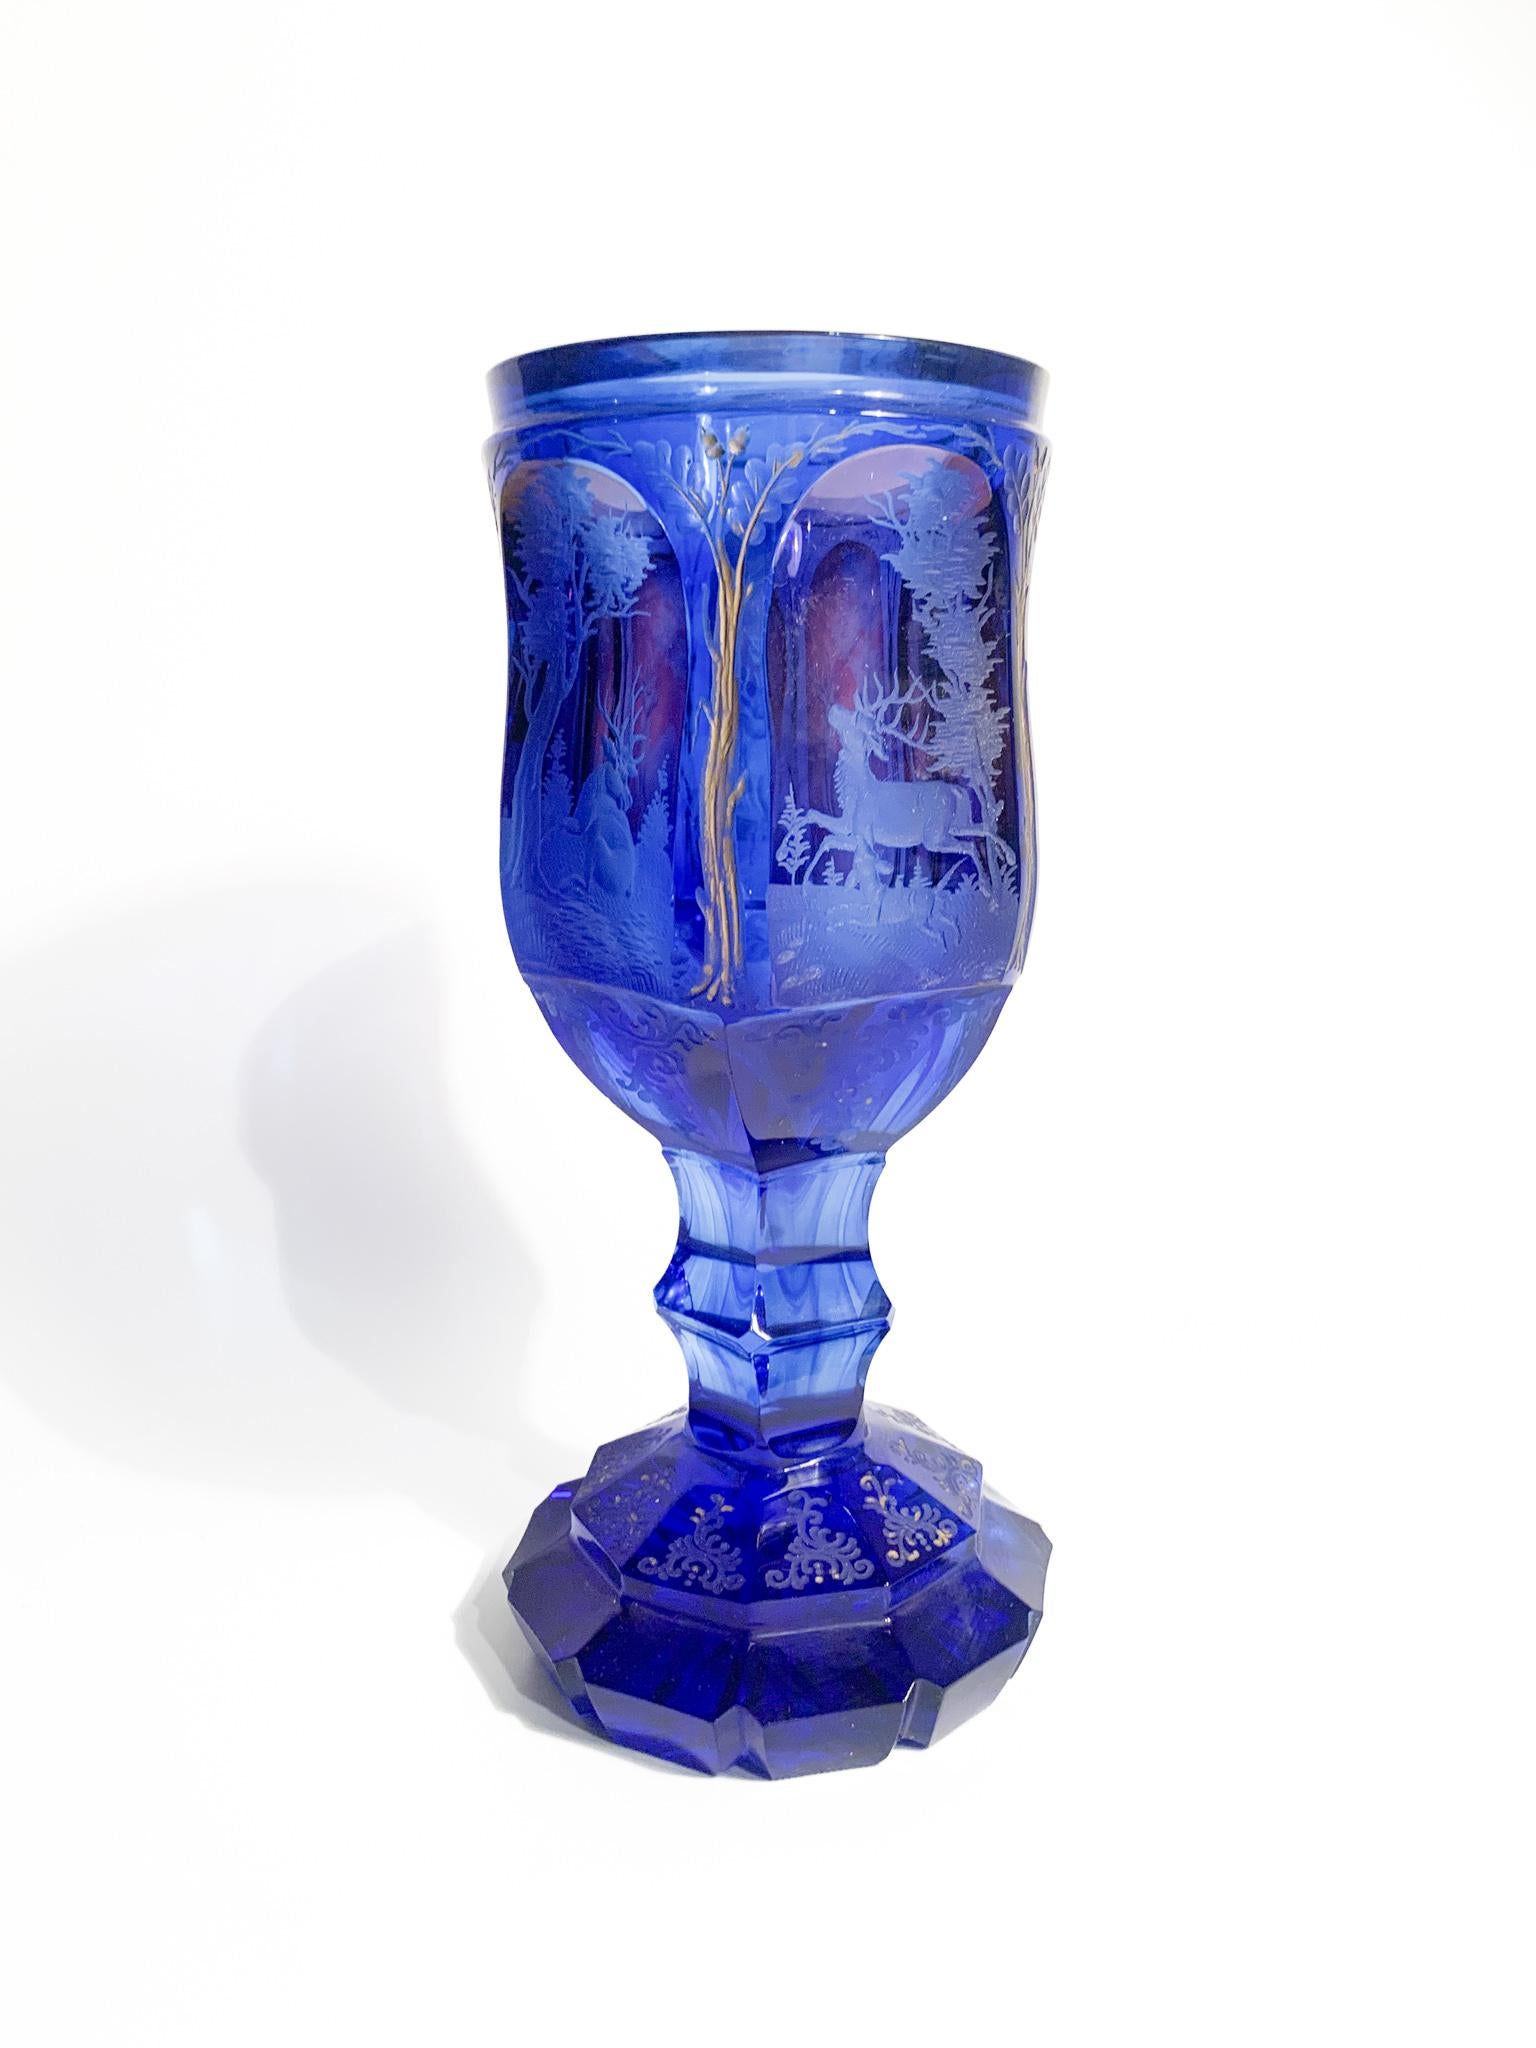 German Biedermeier Blue and Red Crystal Glass with Acid Decoration from the 1800s